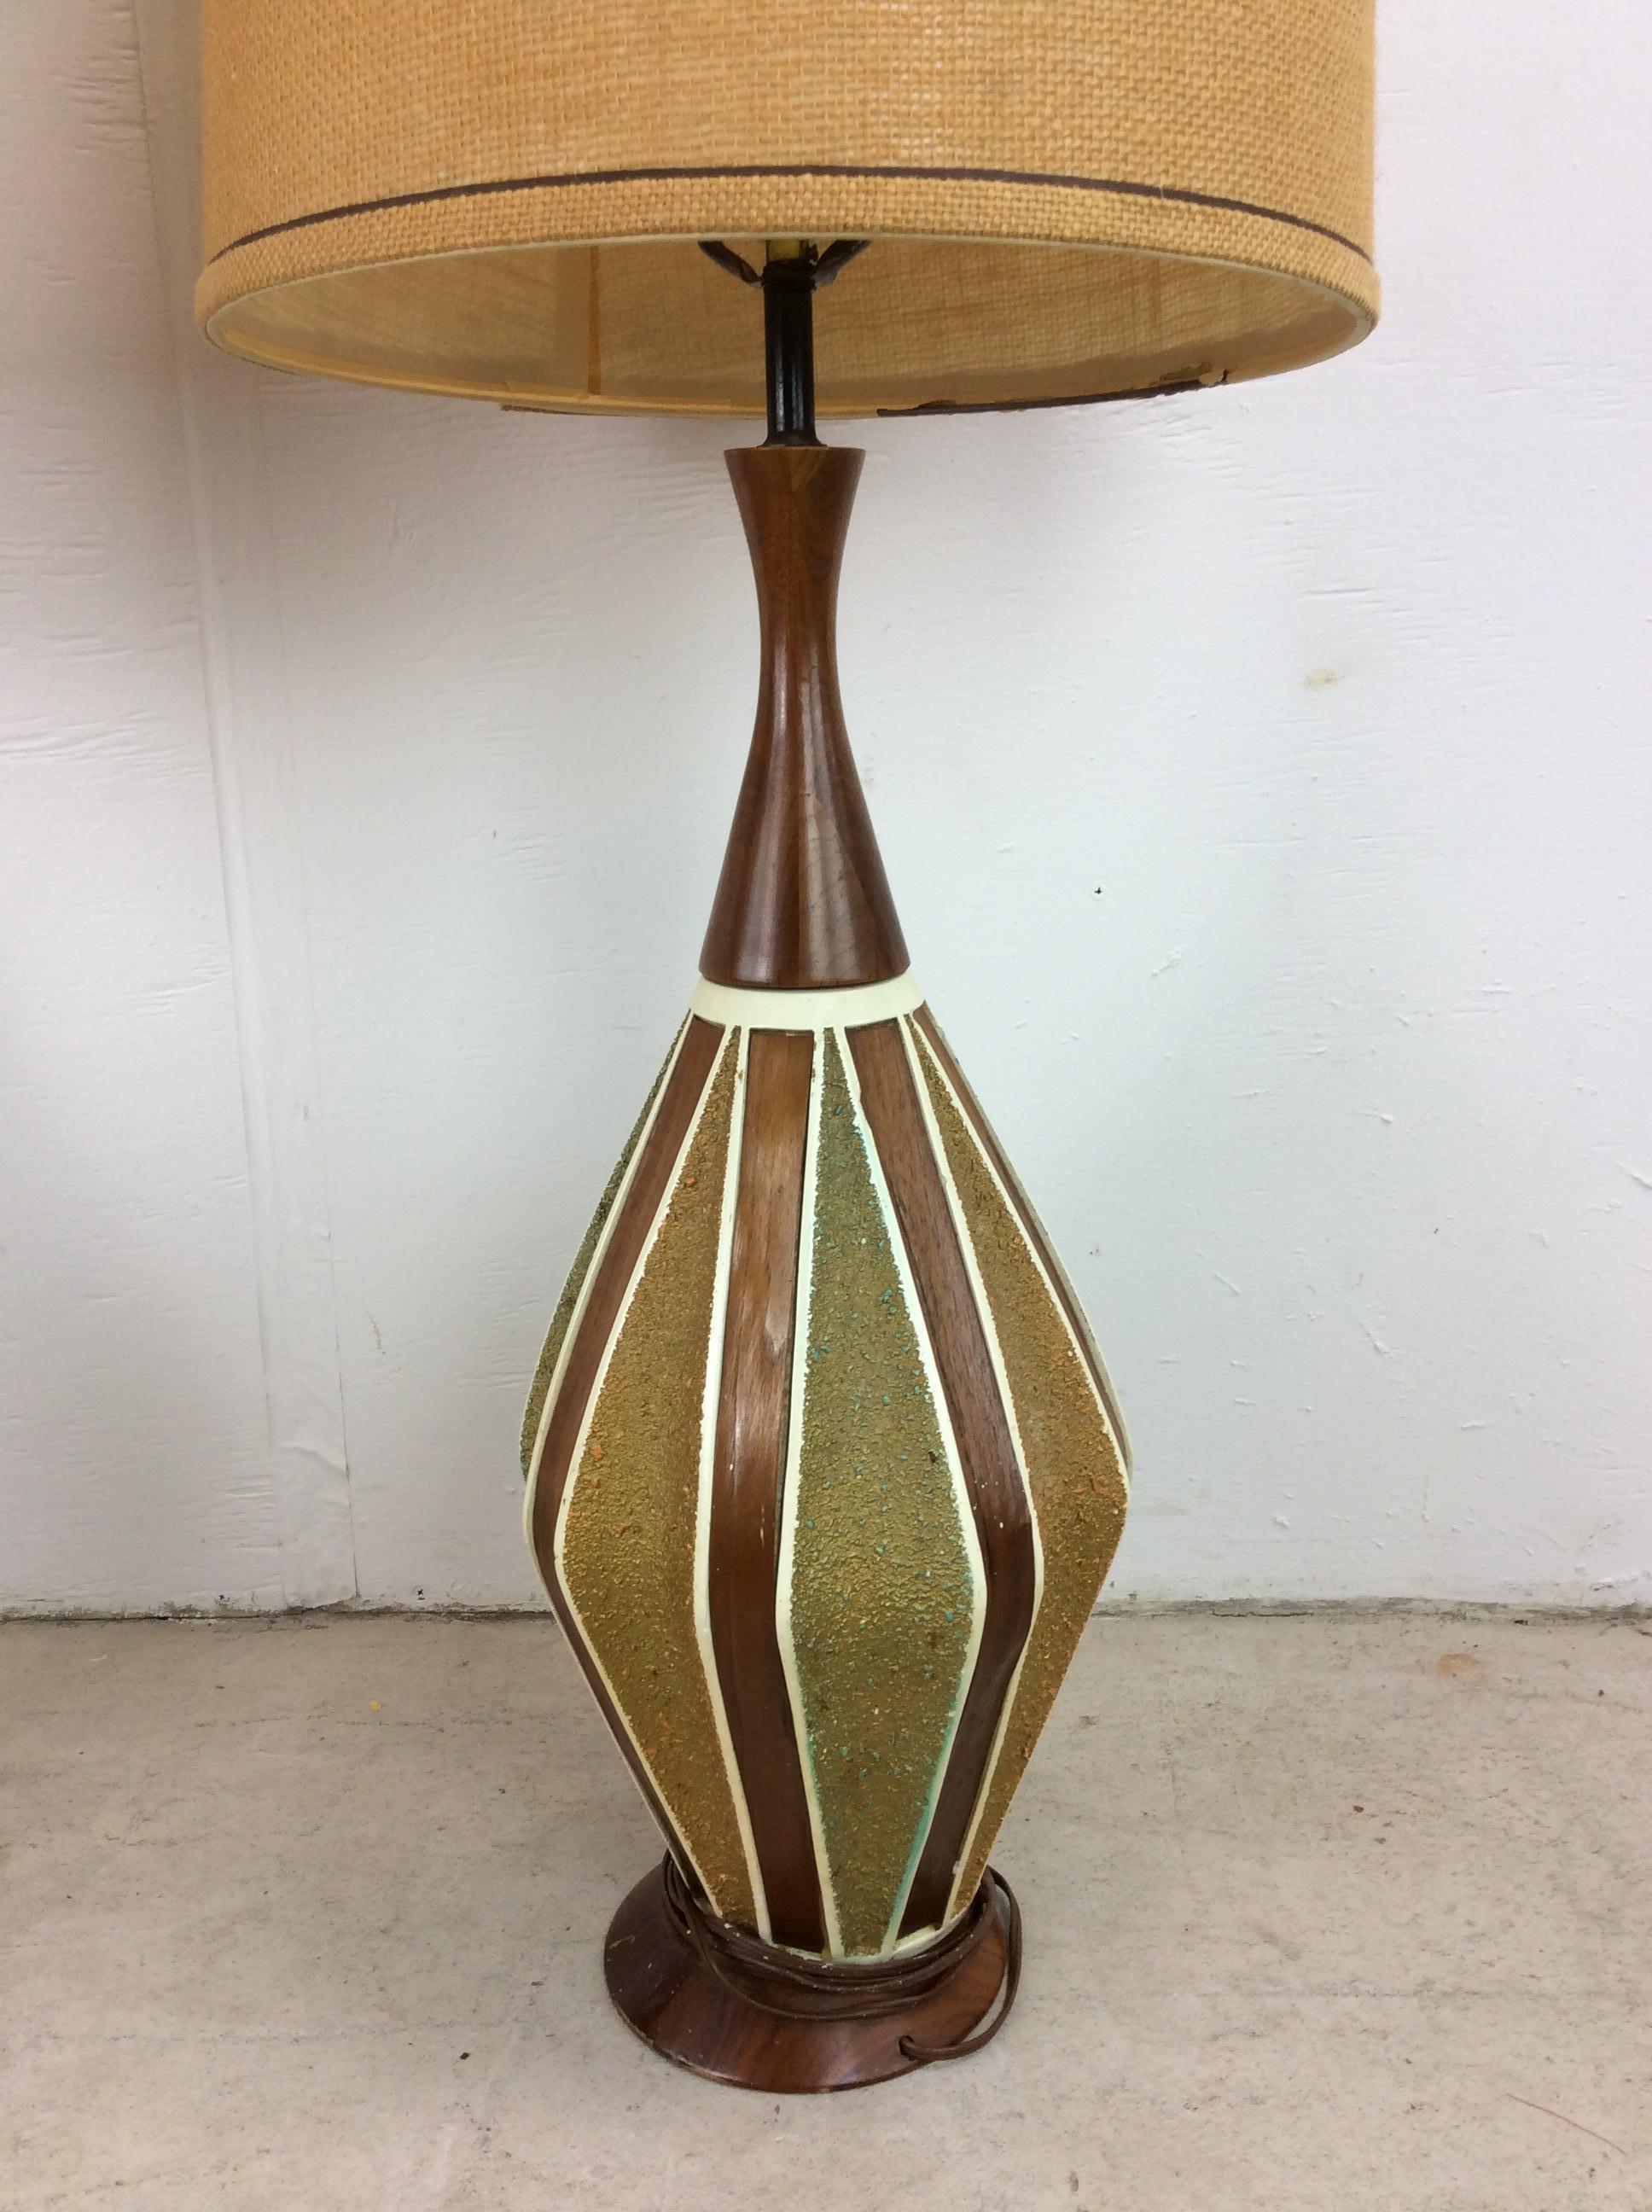 Pair of Mid Century Modern Ceramic Table Lamps with Barrel Shade For Sale 6